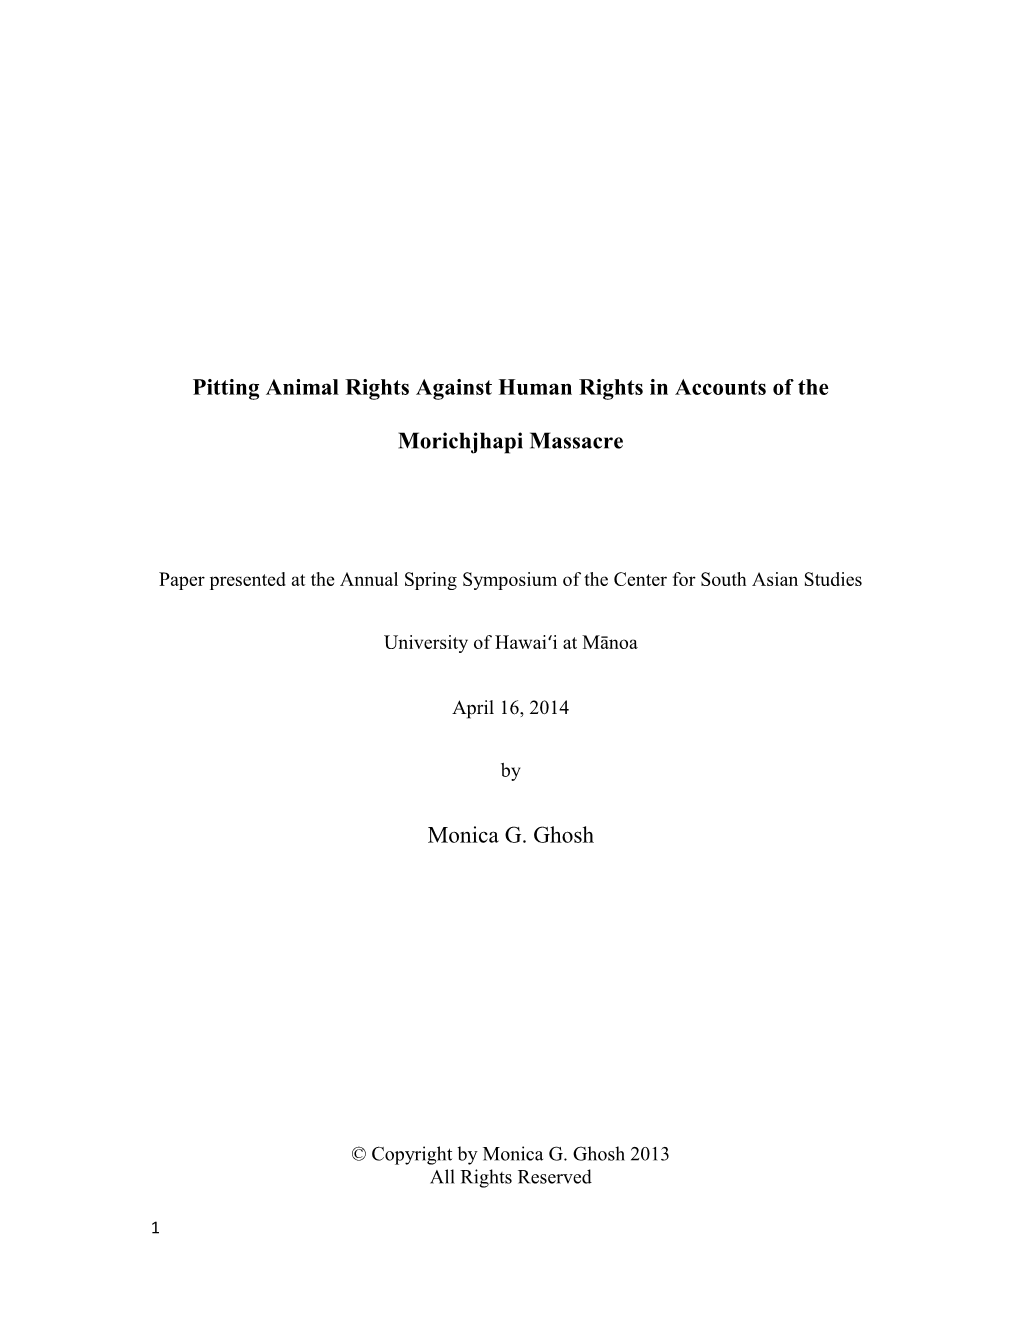 Pitting Animal Rights Against Human Rights in Accounts of the Morichjhapi Massacre